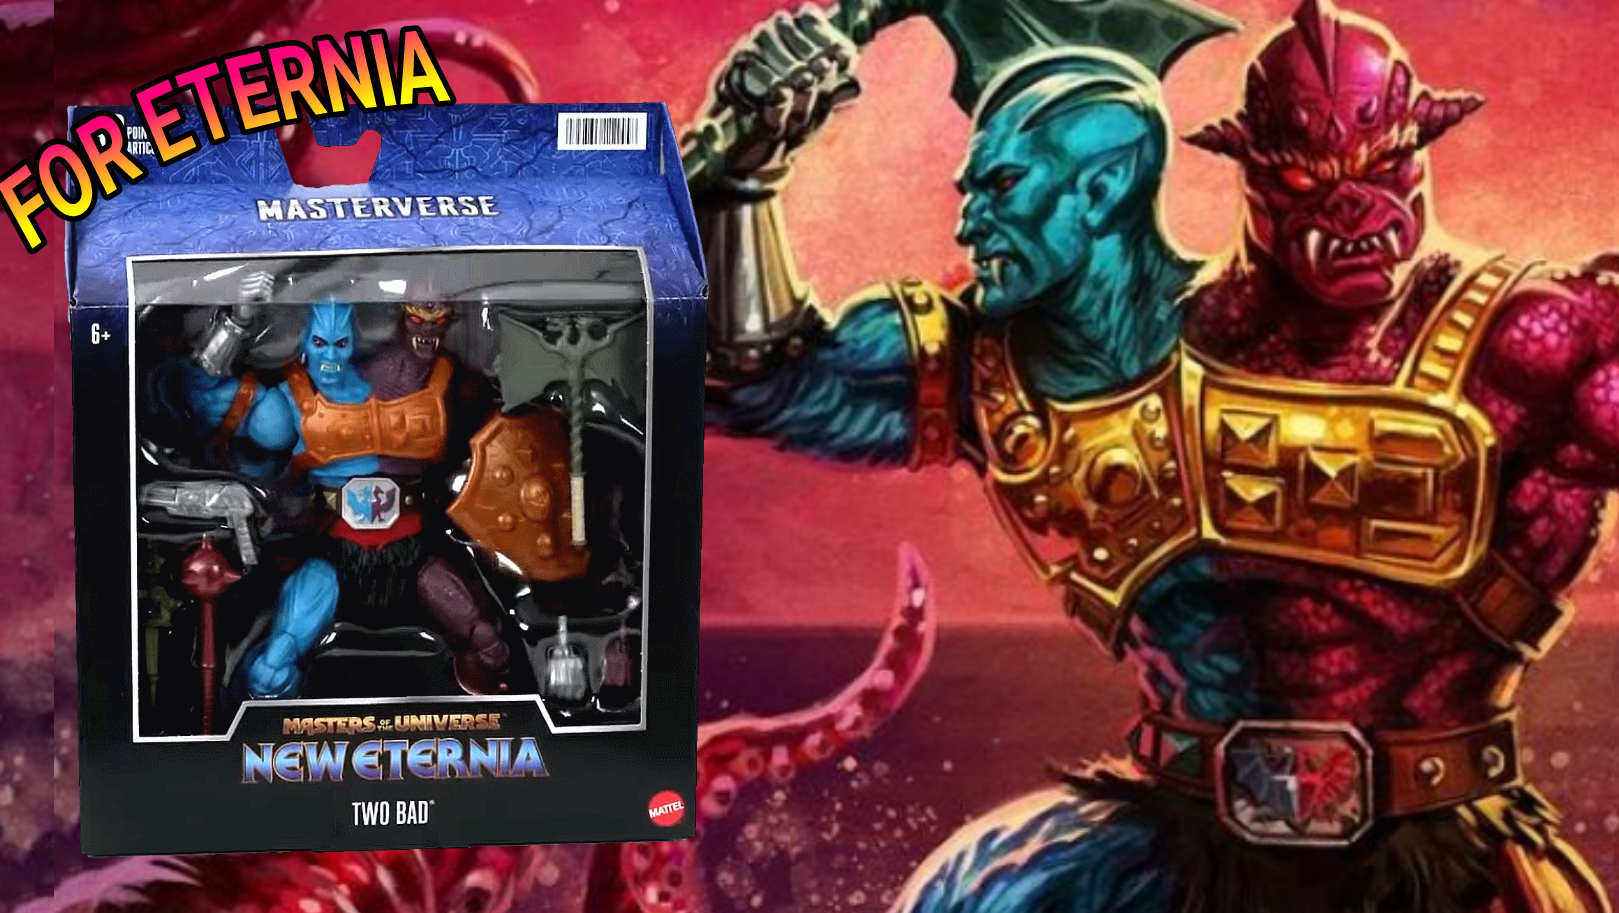 Artwork and Packaging revealed for Two Bad, the Masterverse New Eternia Wave 7 Deluxe Figure